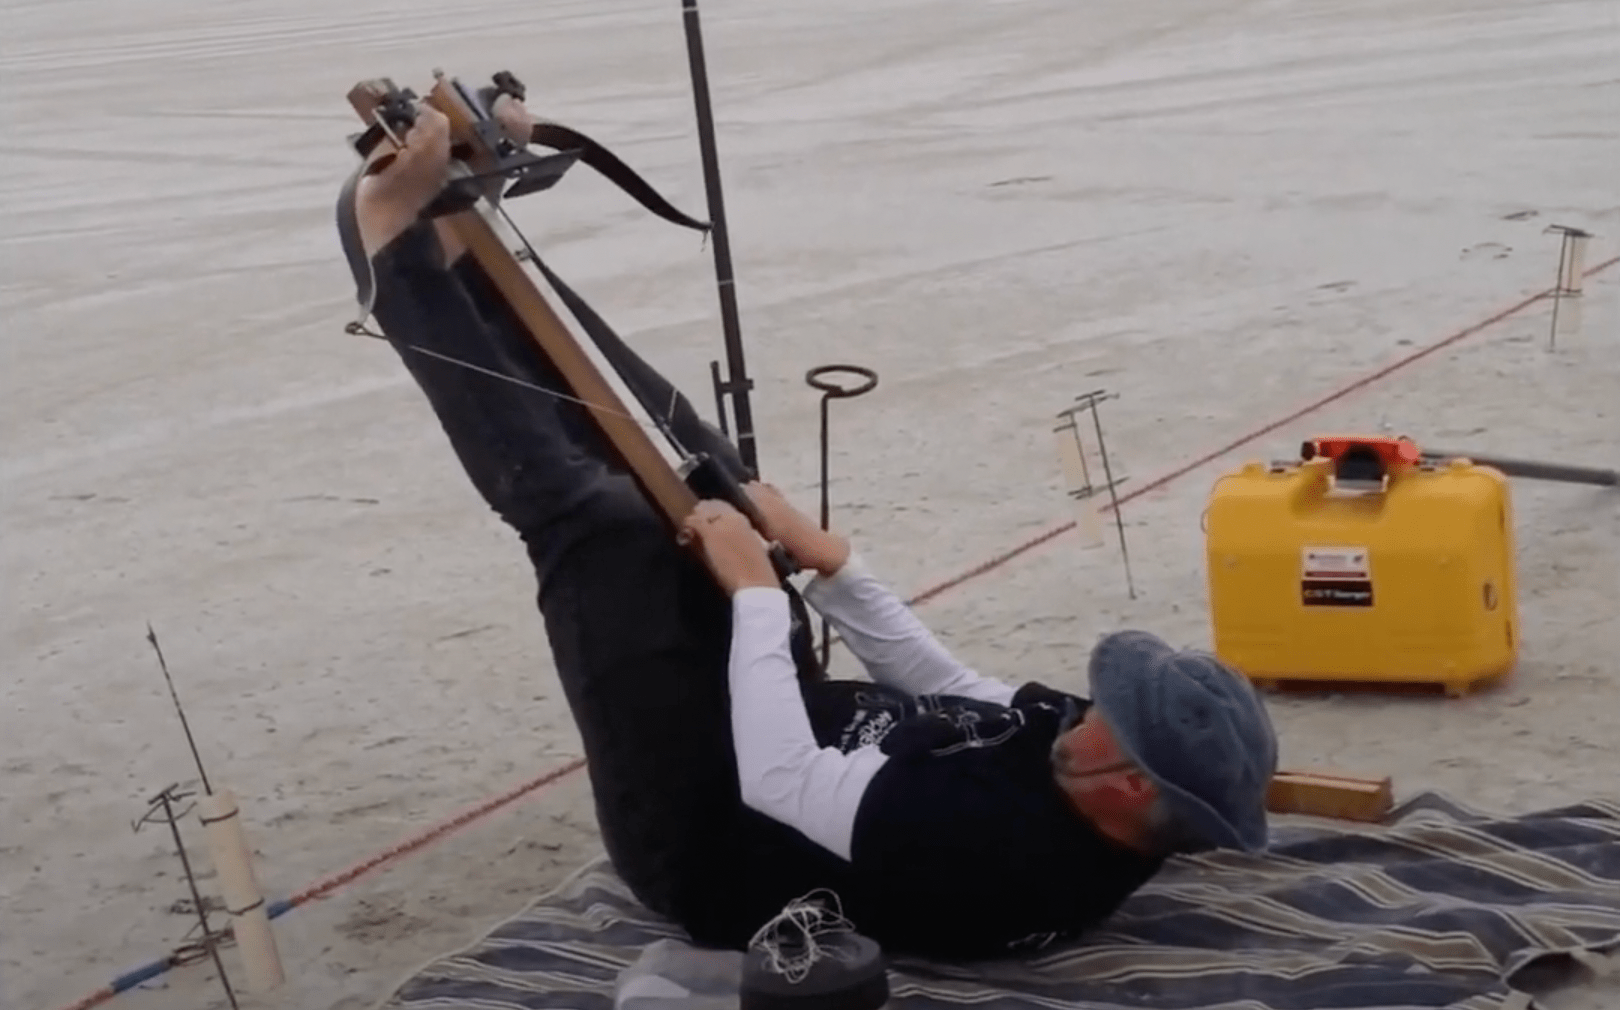 Alan Case tries to break a flight archery record with his footbow.